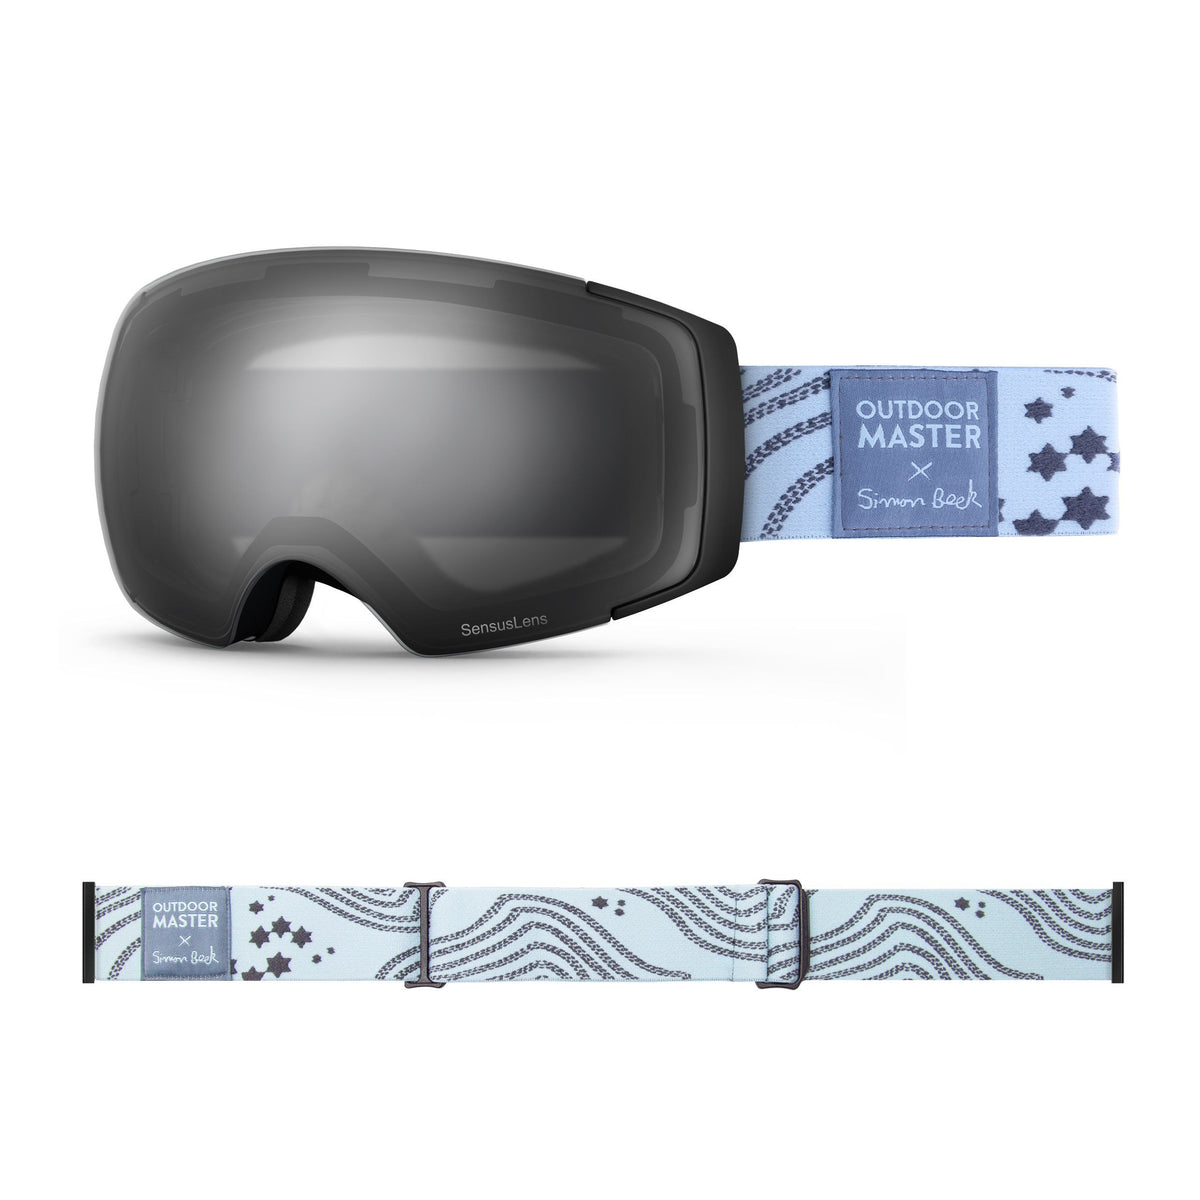 OutdoorMaster x Simon Beck Ski Goggles Pro Series - Snowshoeing Art Limited Edition OutdoorMaster GreenLens VLT 10% TAC Grey With REVO Silver Polarized Star Road-Lightsteelblue